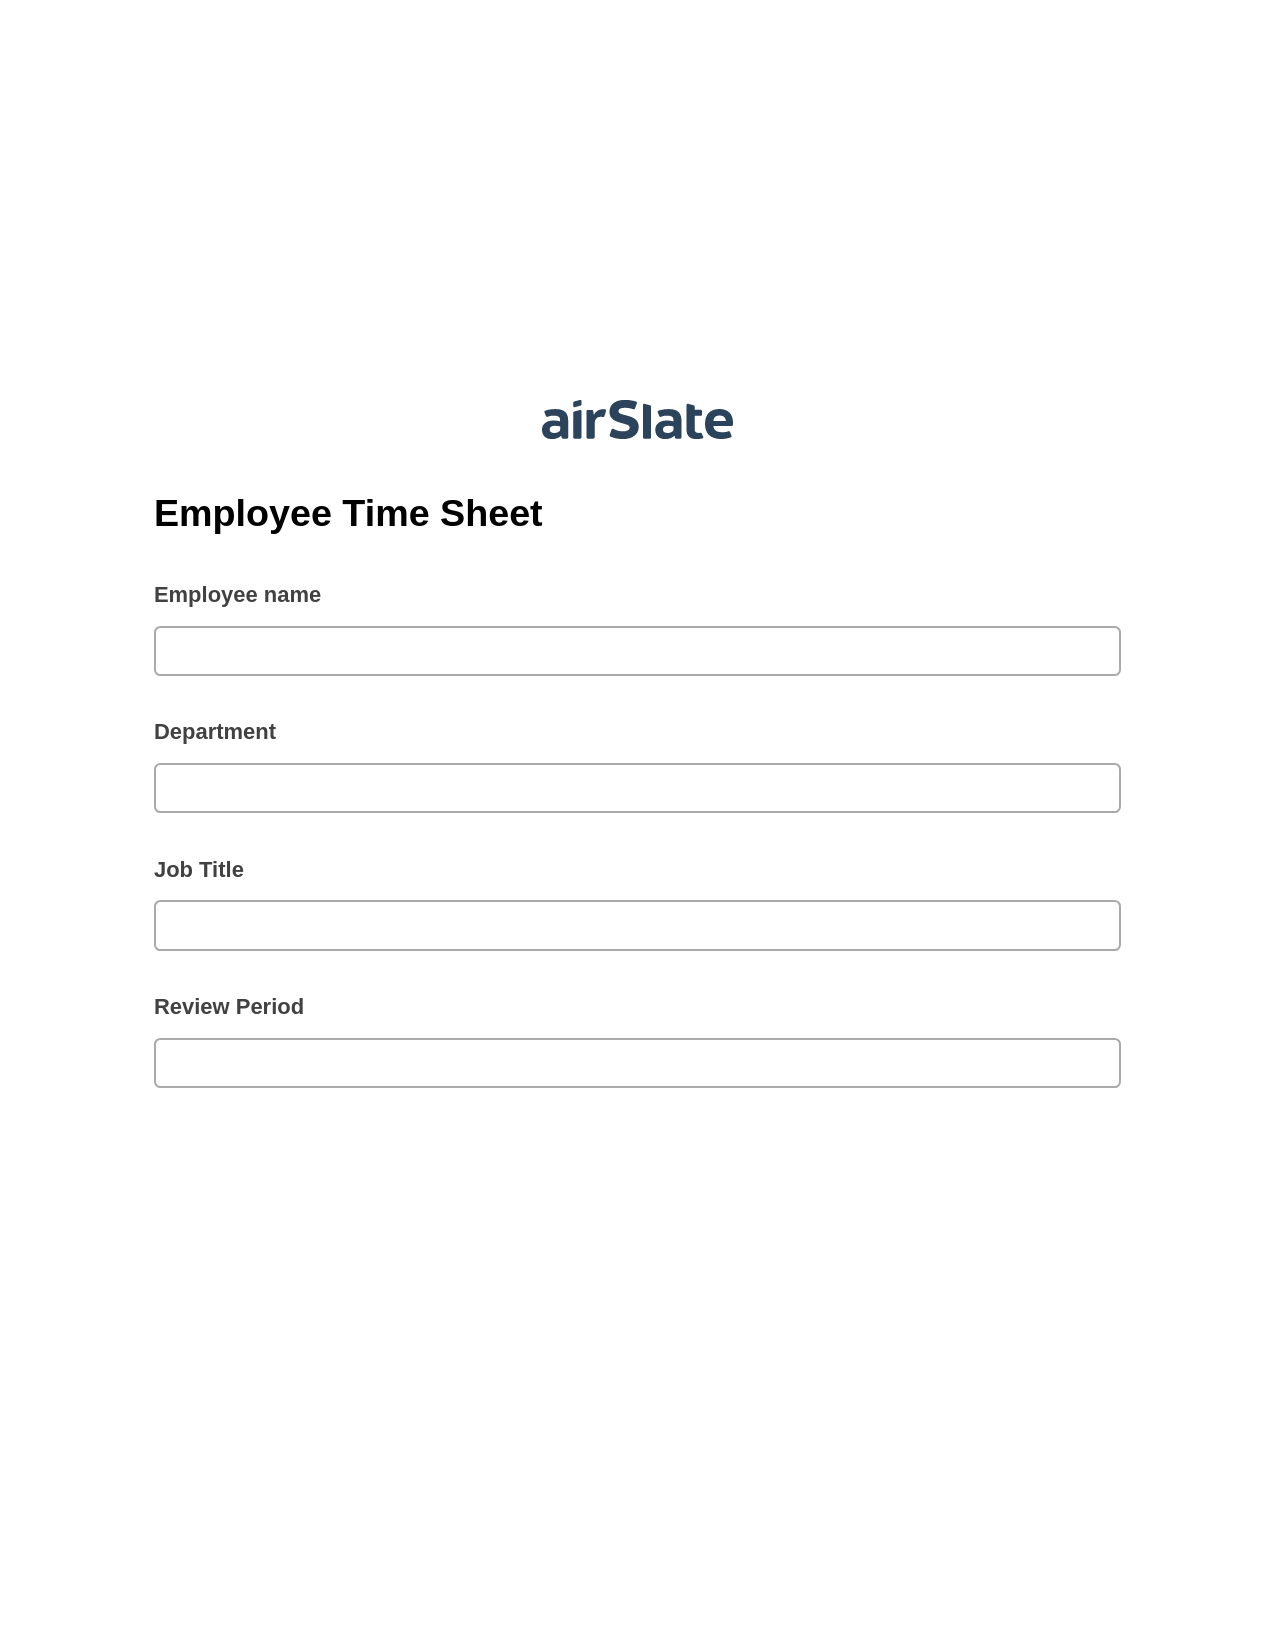 Employee Time Sheet Pre-fill from MS Dynamics 365 Records, Create slate addon, Export to NetSuite Bot